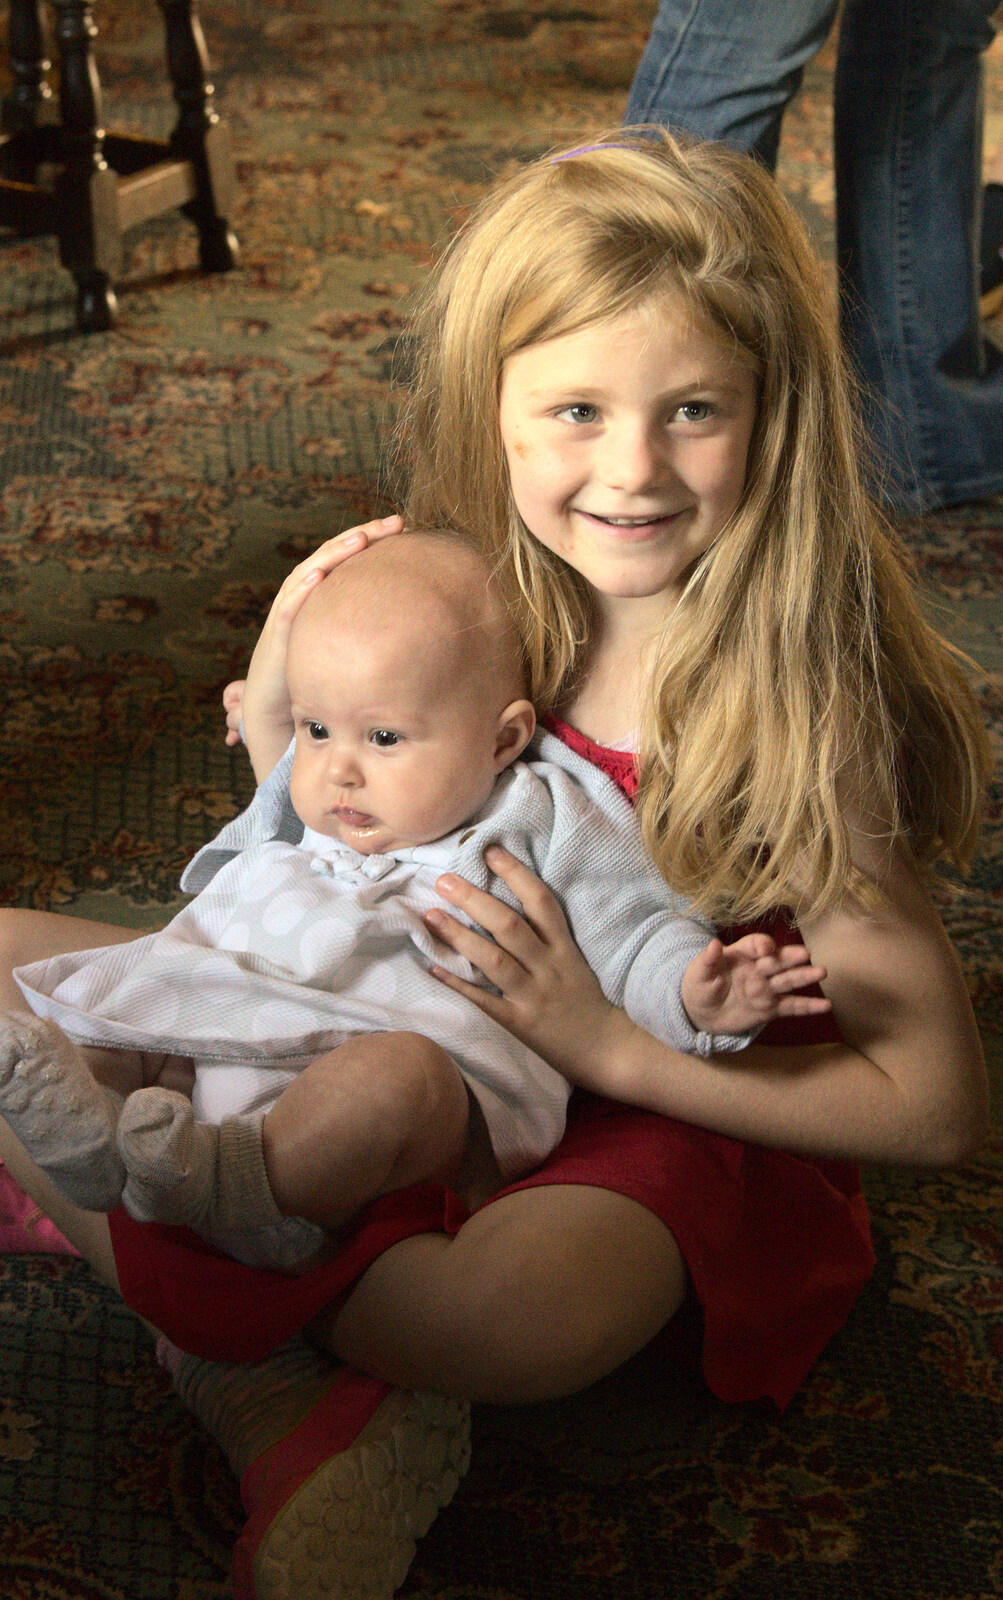 Isabella and Jessica from Matthew's Birthday up The Swan Inn, Brome, Suffolk - 17th August 2014